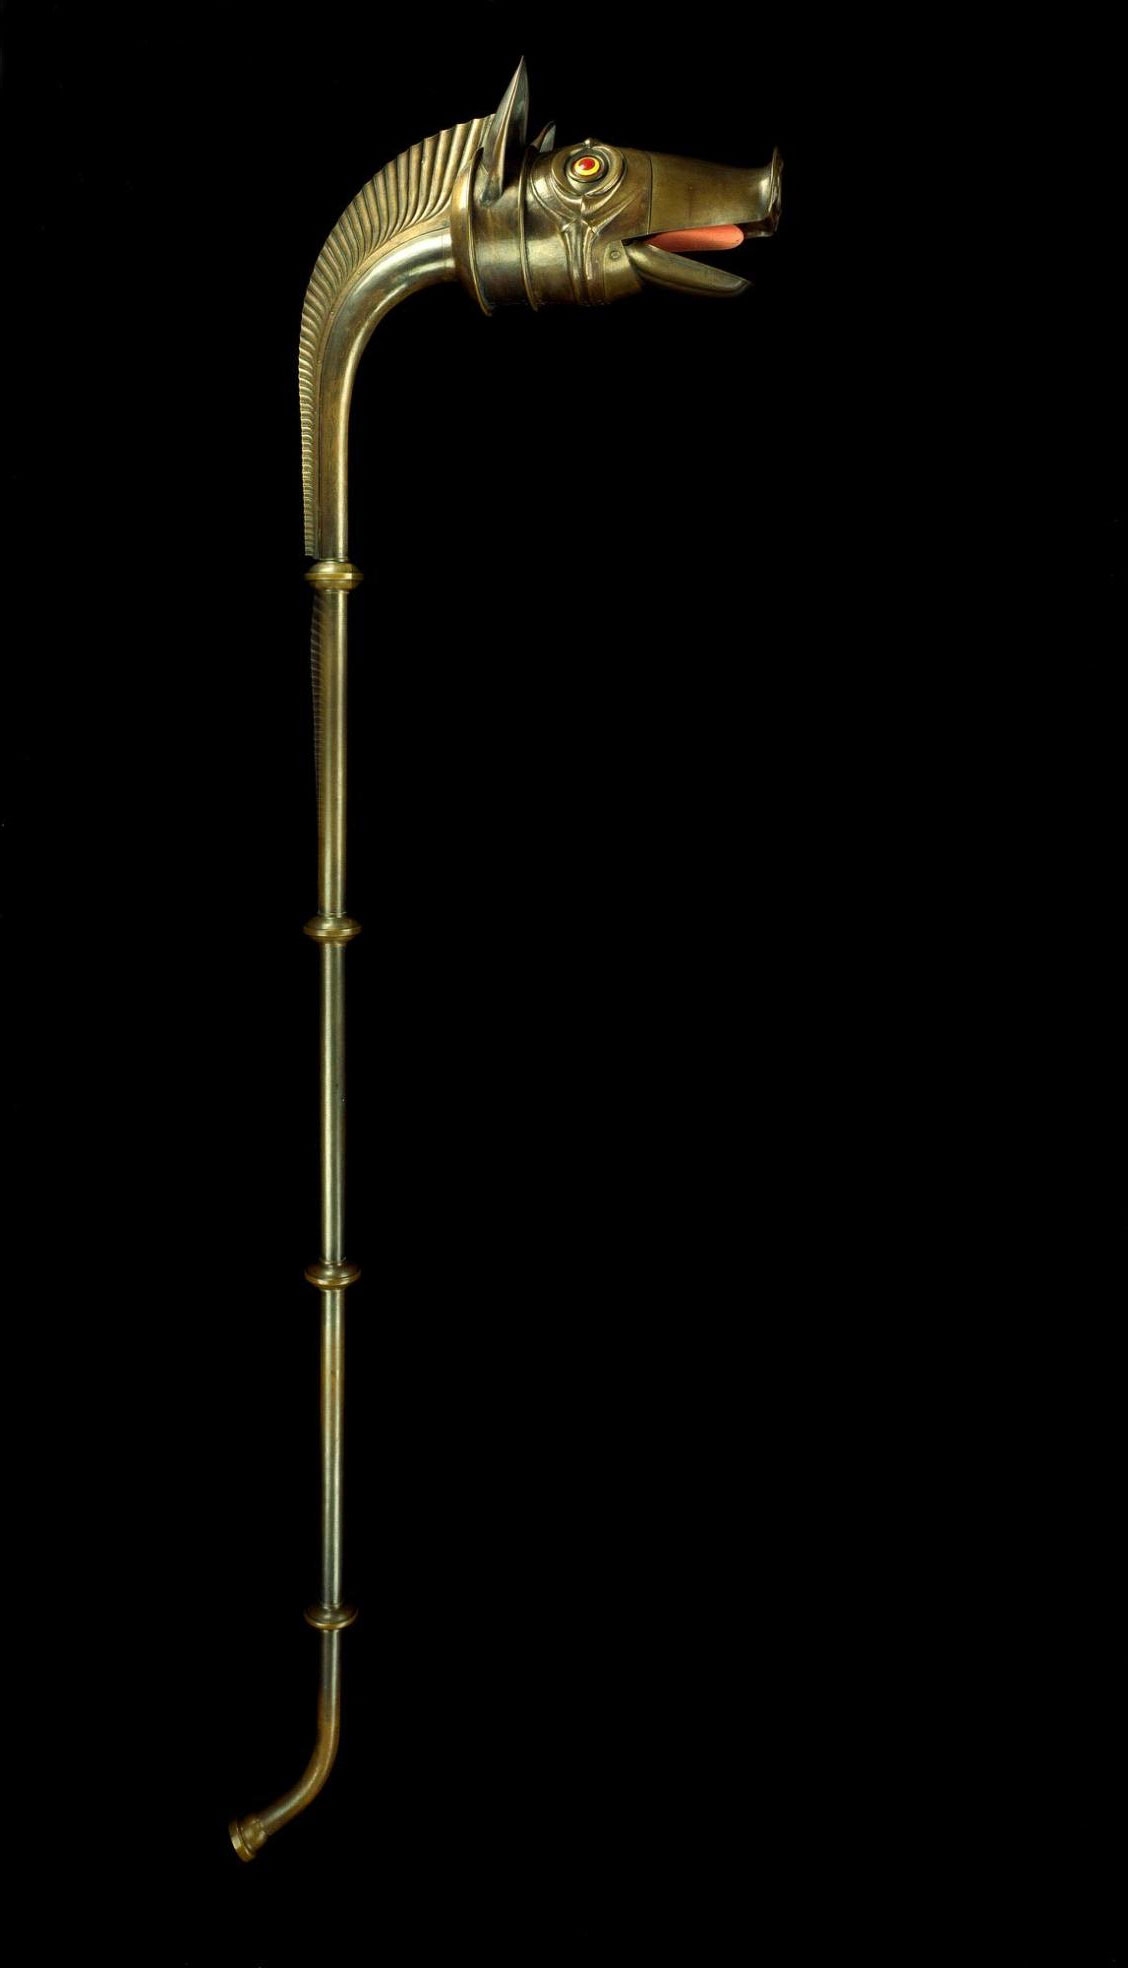 Reconstruction of the Deskford carnyx (80 - 200 AD), in bronze and brass, made by Dr John Purser and John Creed.